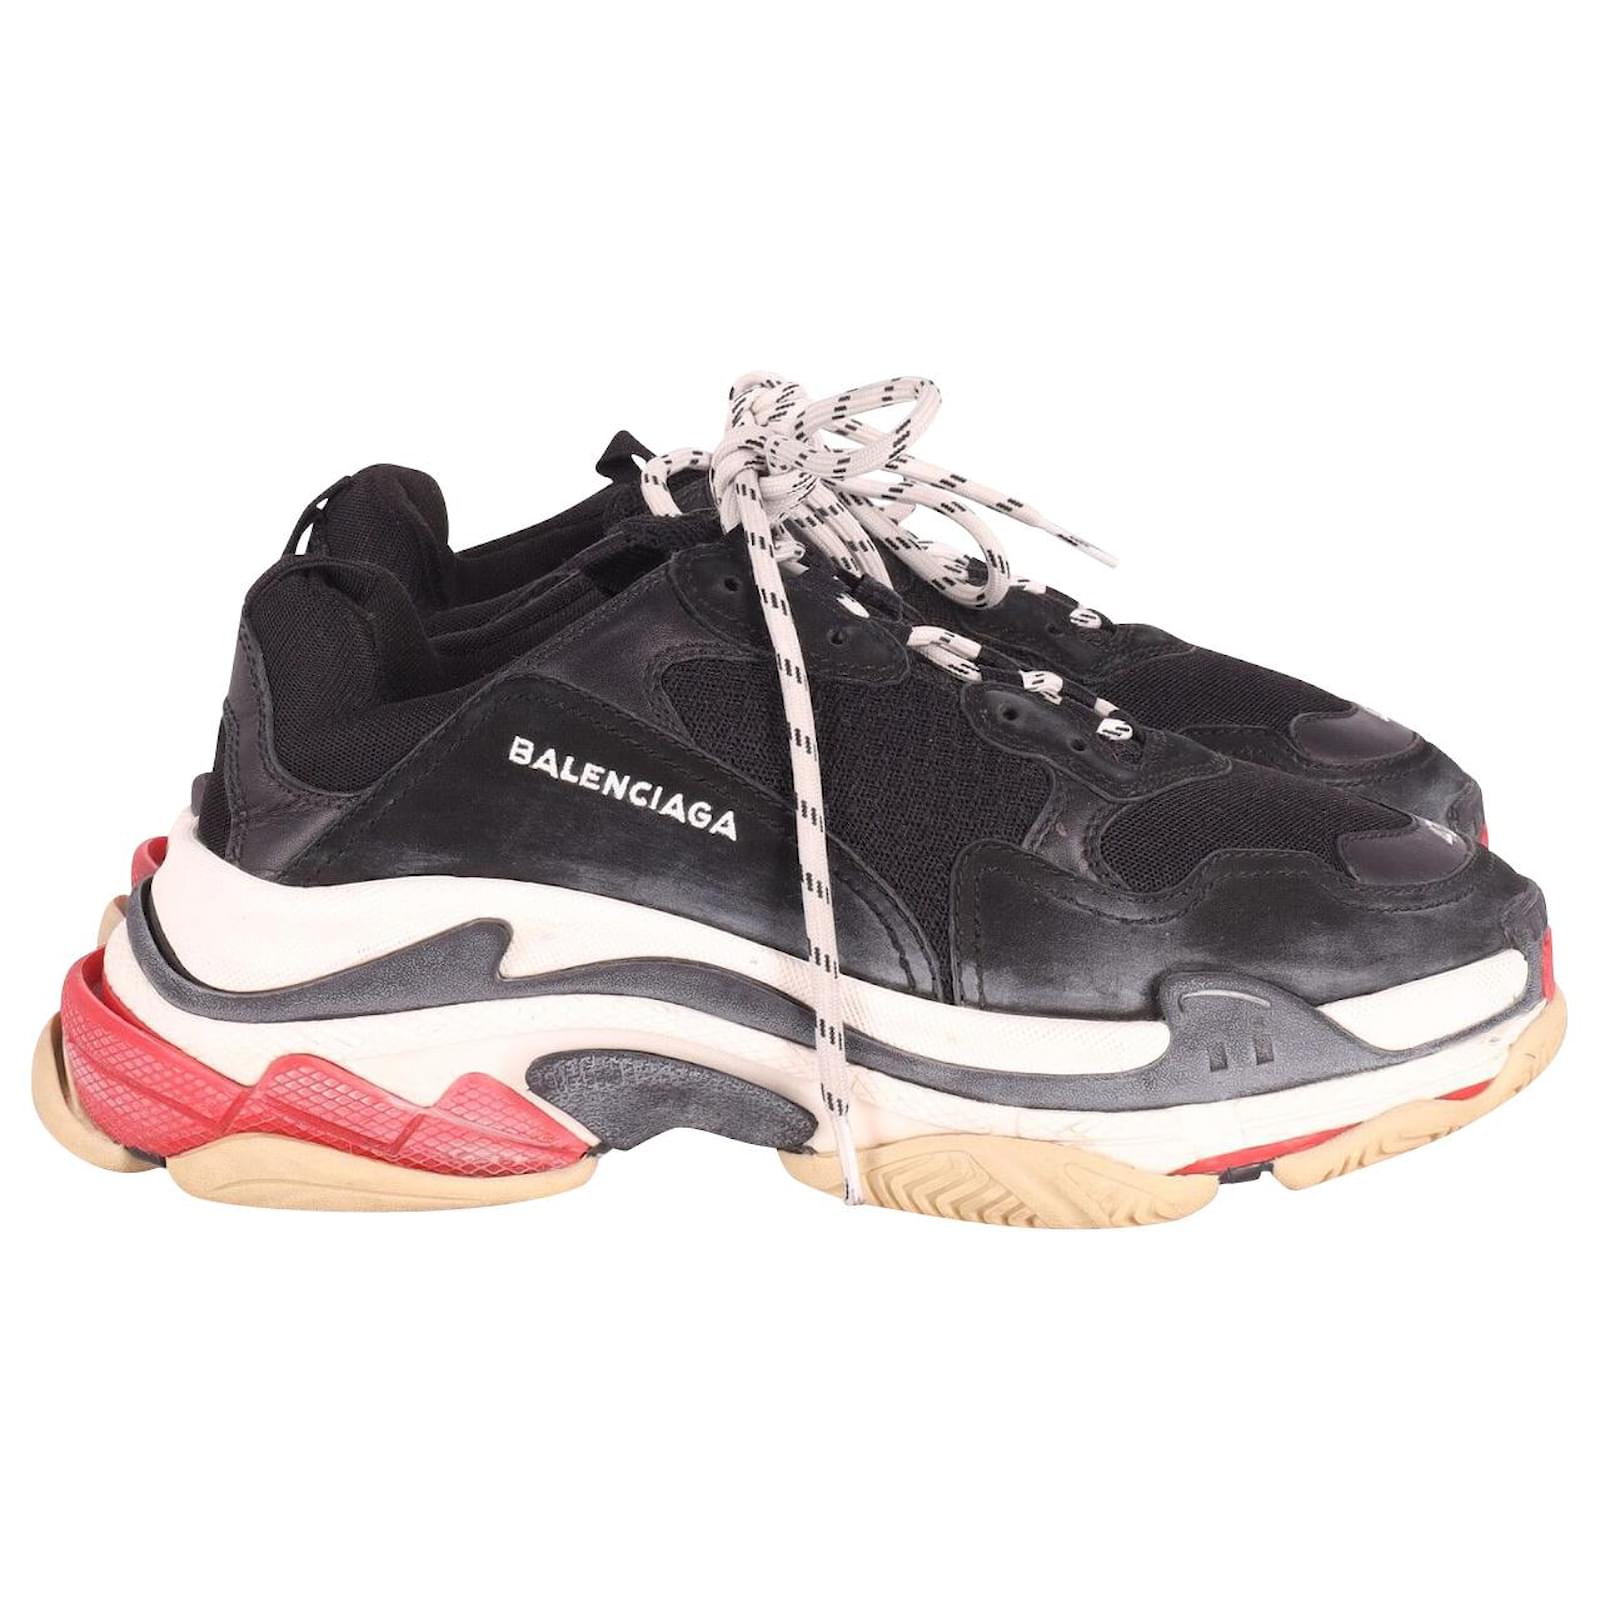 gerningsmanden modstand Calamity Balenciaga Triple S Sneakers in Black Red Leather and Mesh ref.897942 -  Joli Closet